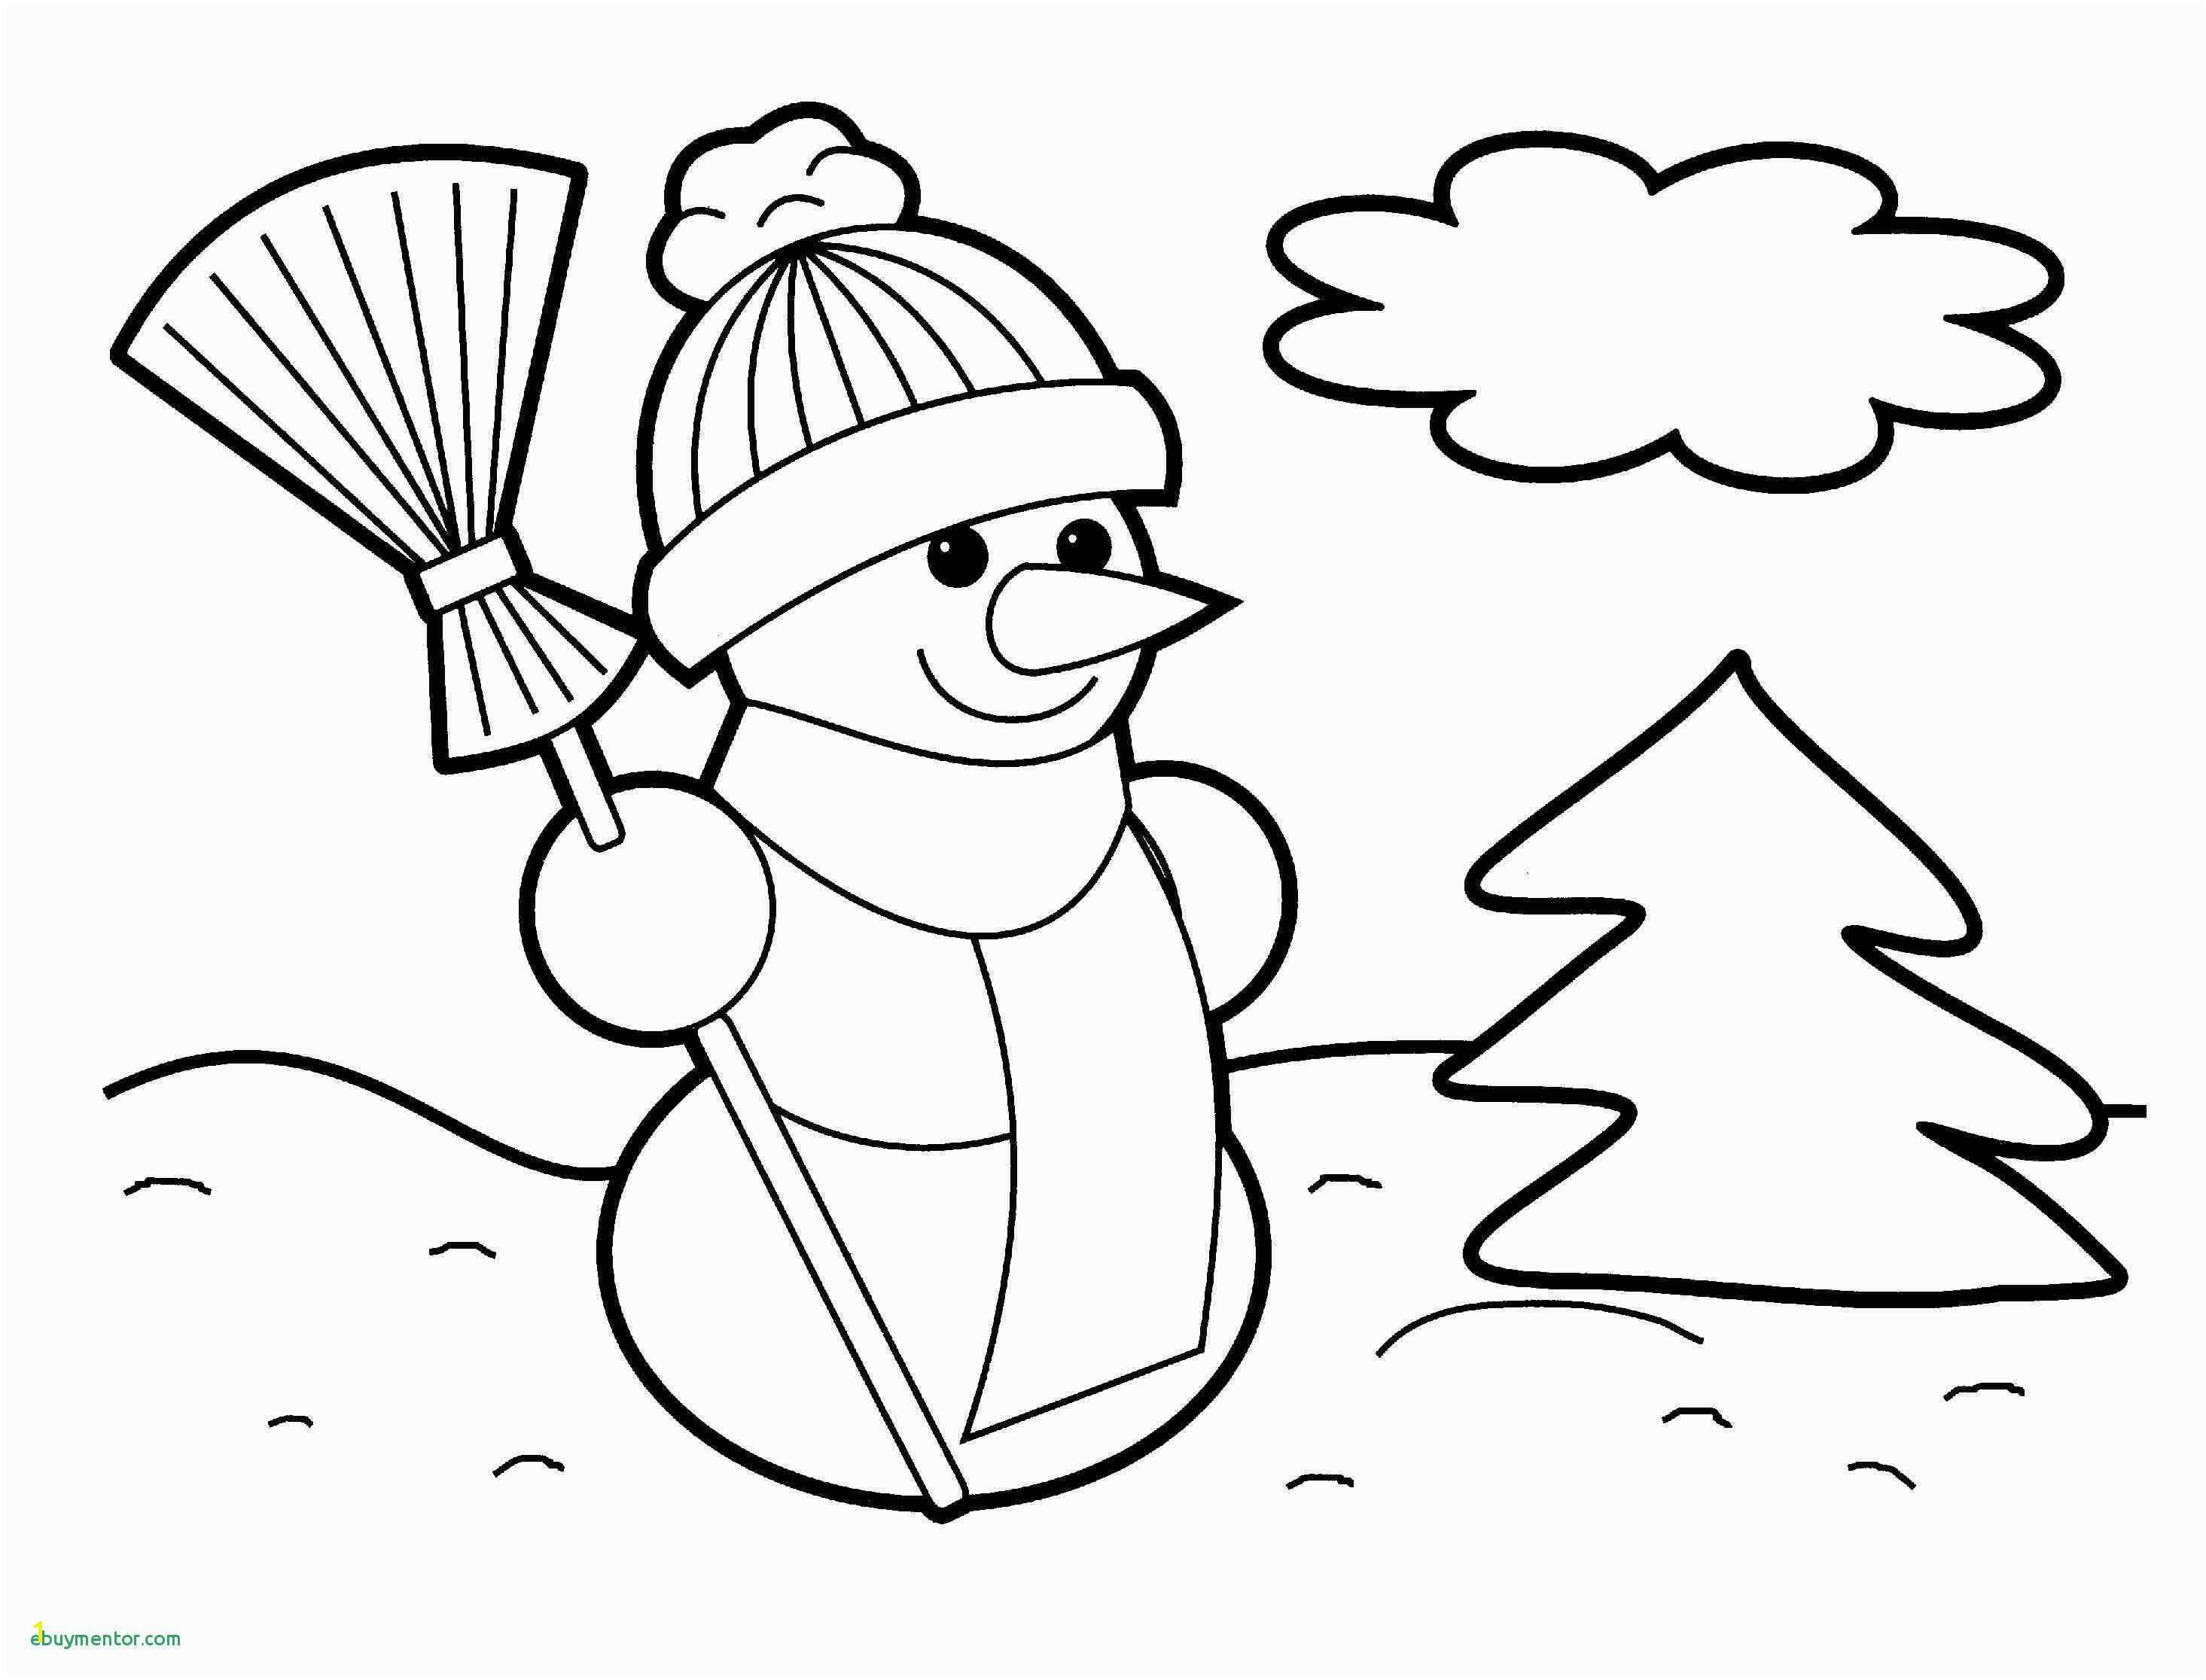 Christmas Ball ornament Coloring Pages 22 Free Christmas Balls Coloring Pages